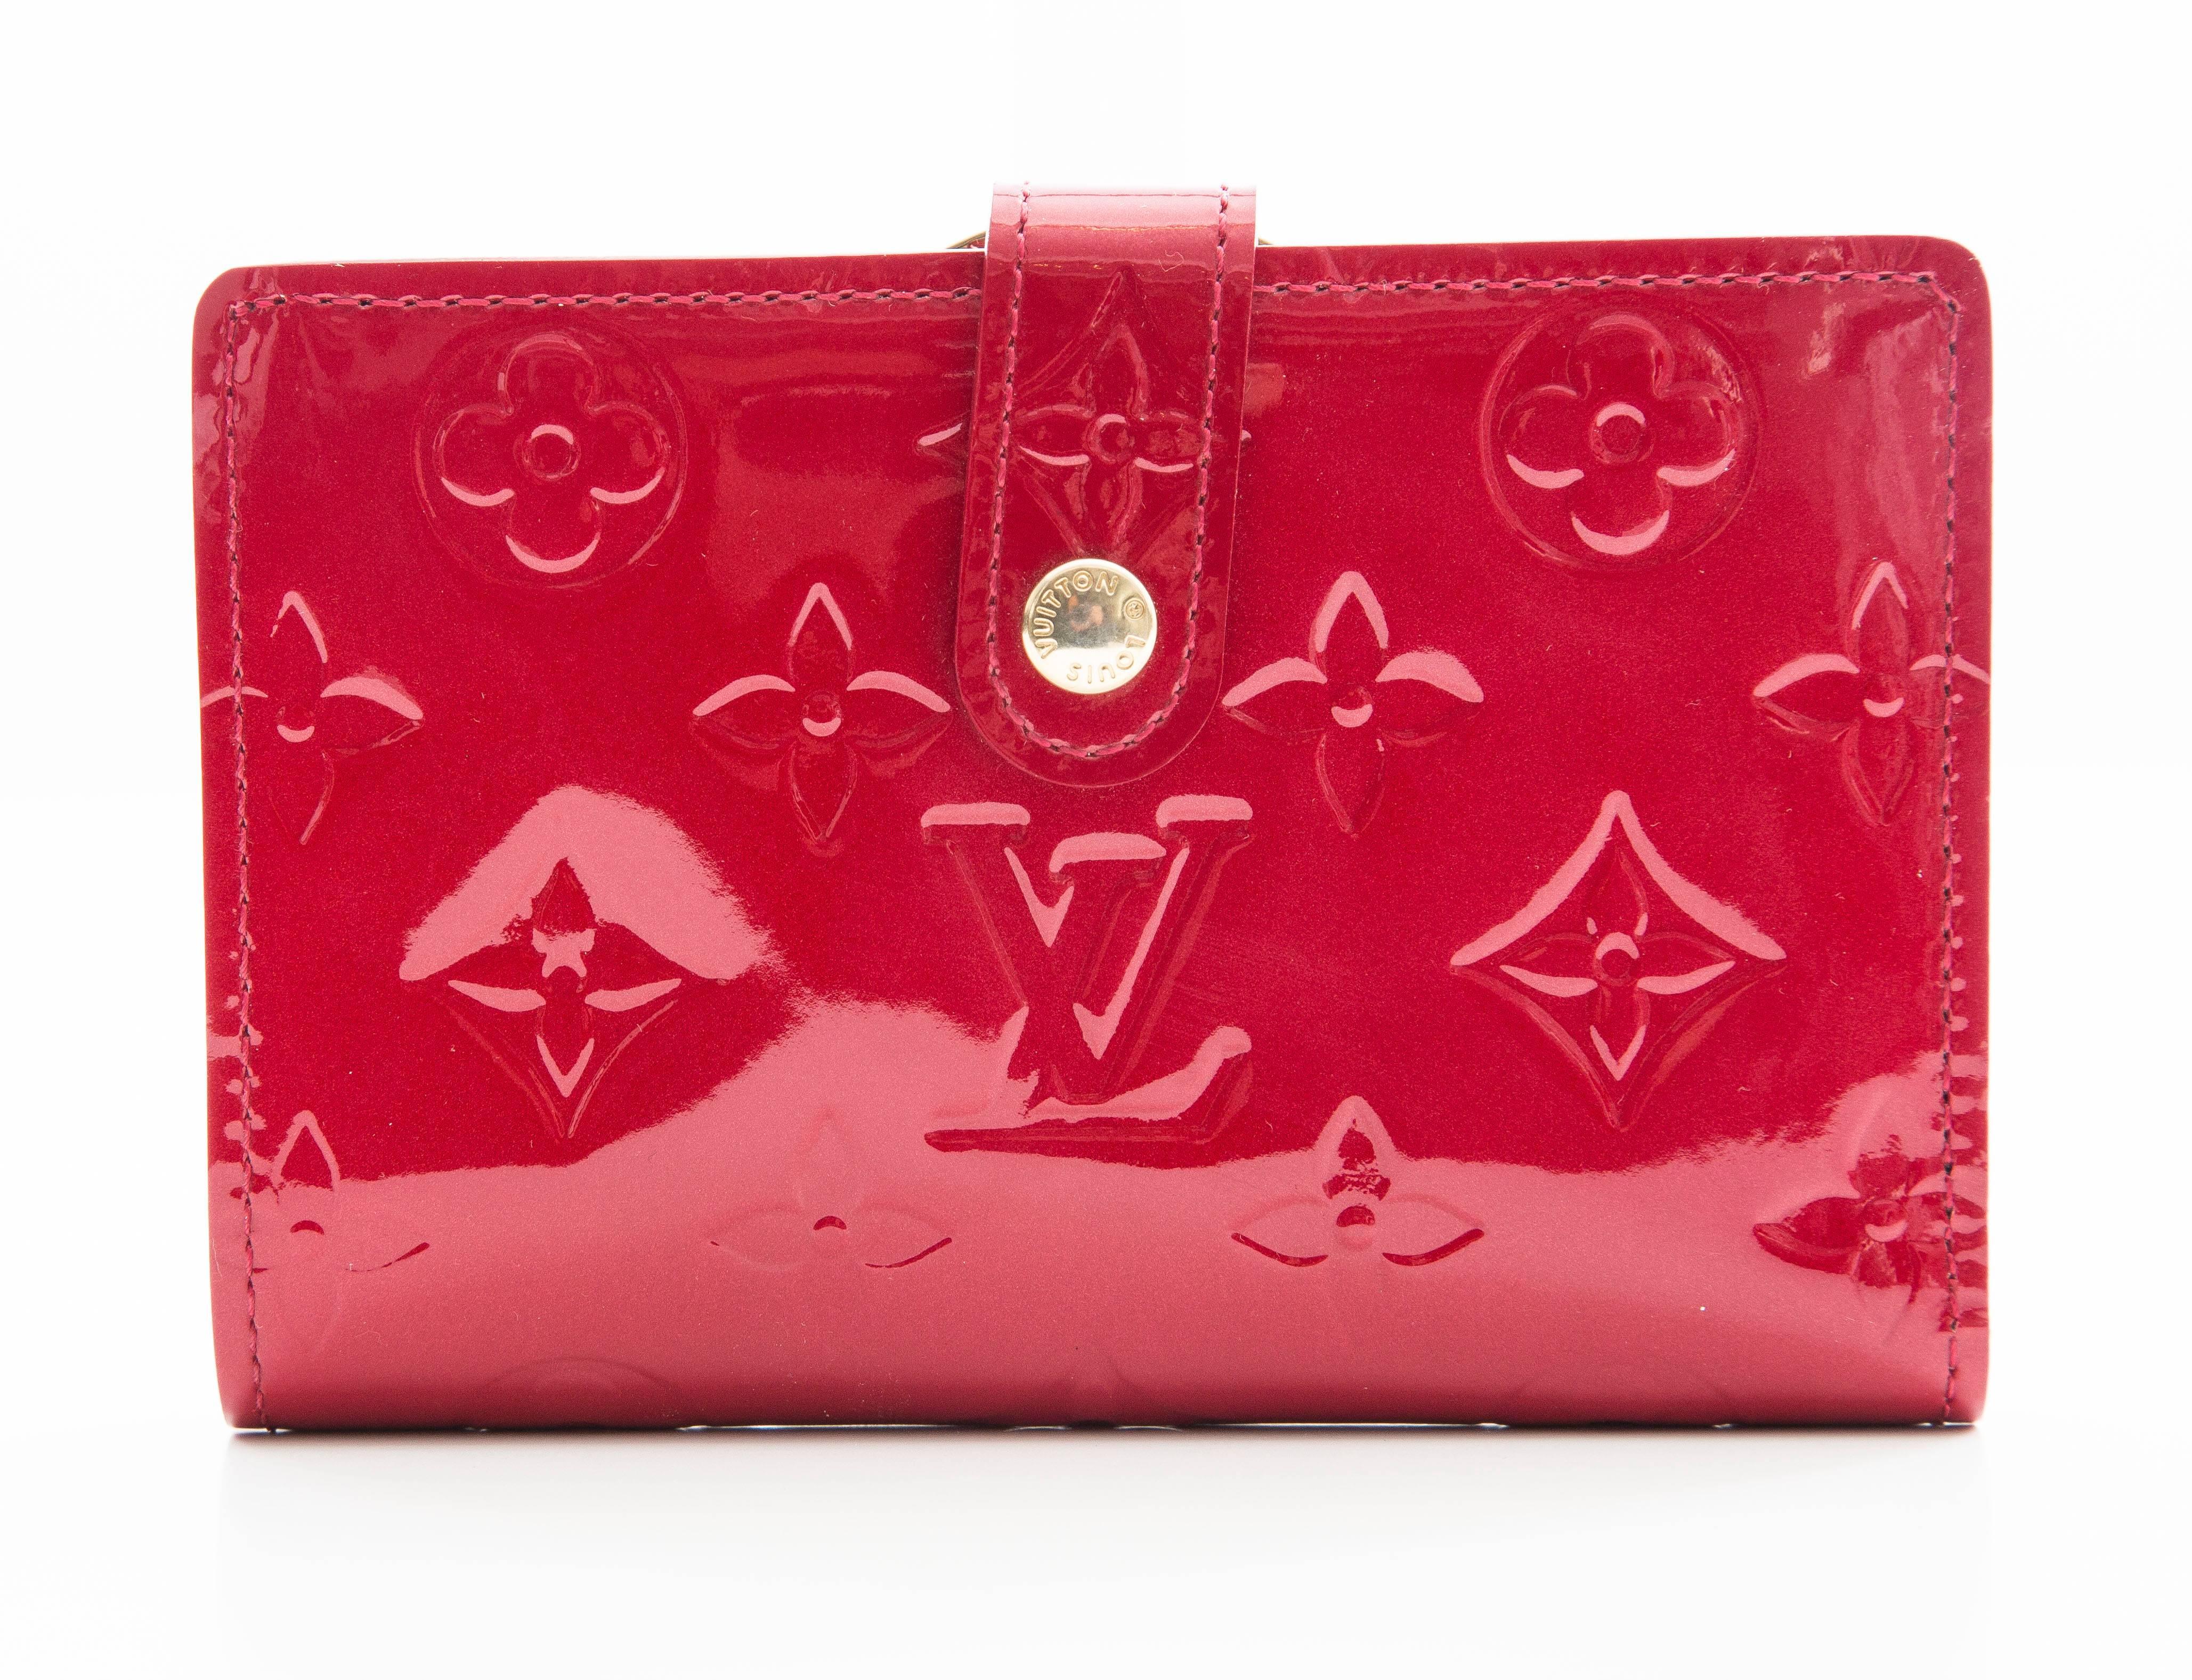 Cherry red monogram vernis Louis Vuitton French purse wallet with brass hardware, eight interior card slots, one bill compartment, snap coin pocket and front snap closure.

 Height 3.5”, Width 5”, Depth 1”